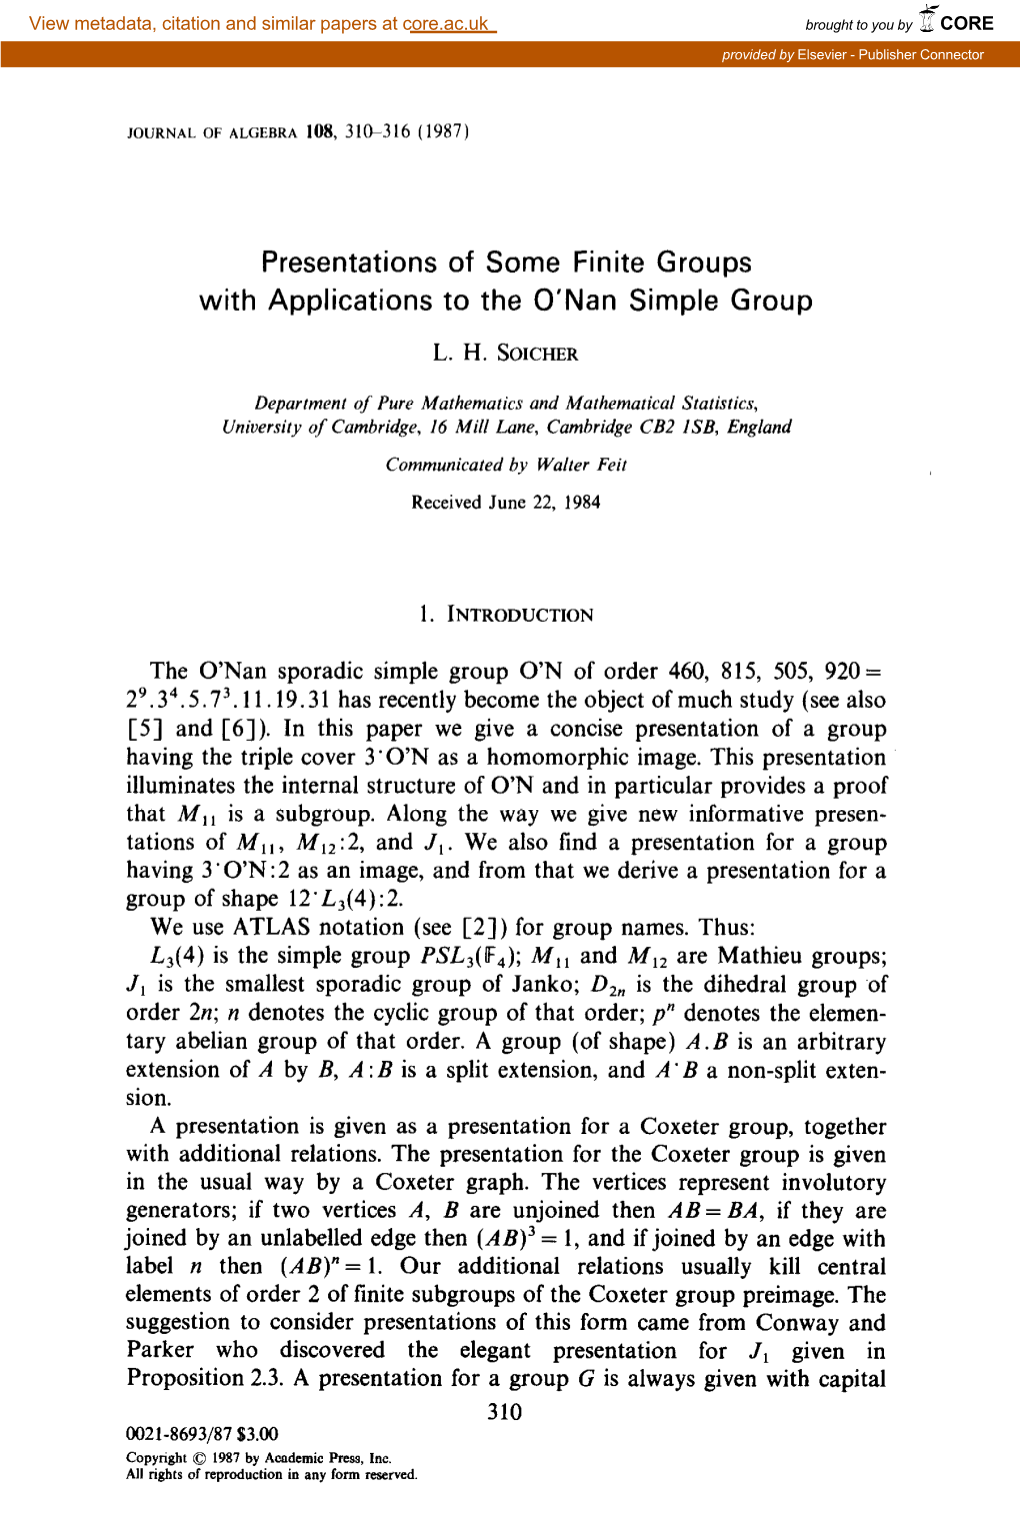 Presentations of Some Finite Groups with Applications to the O'nan